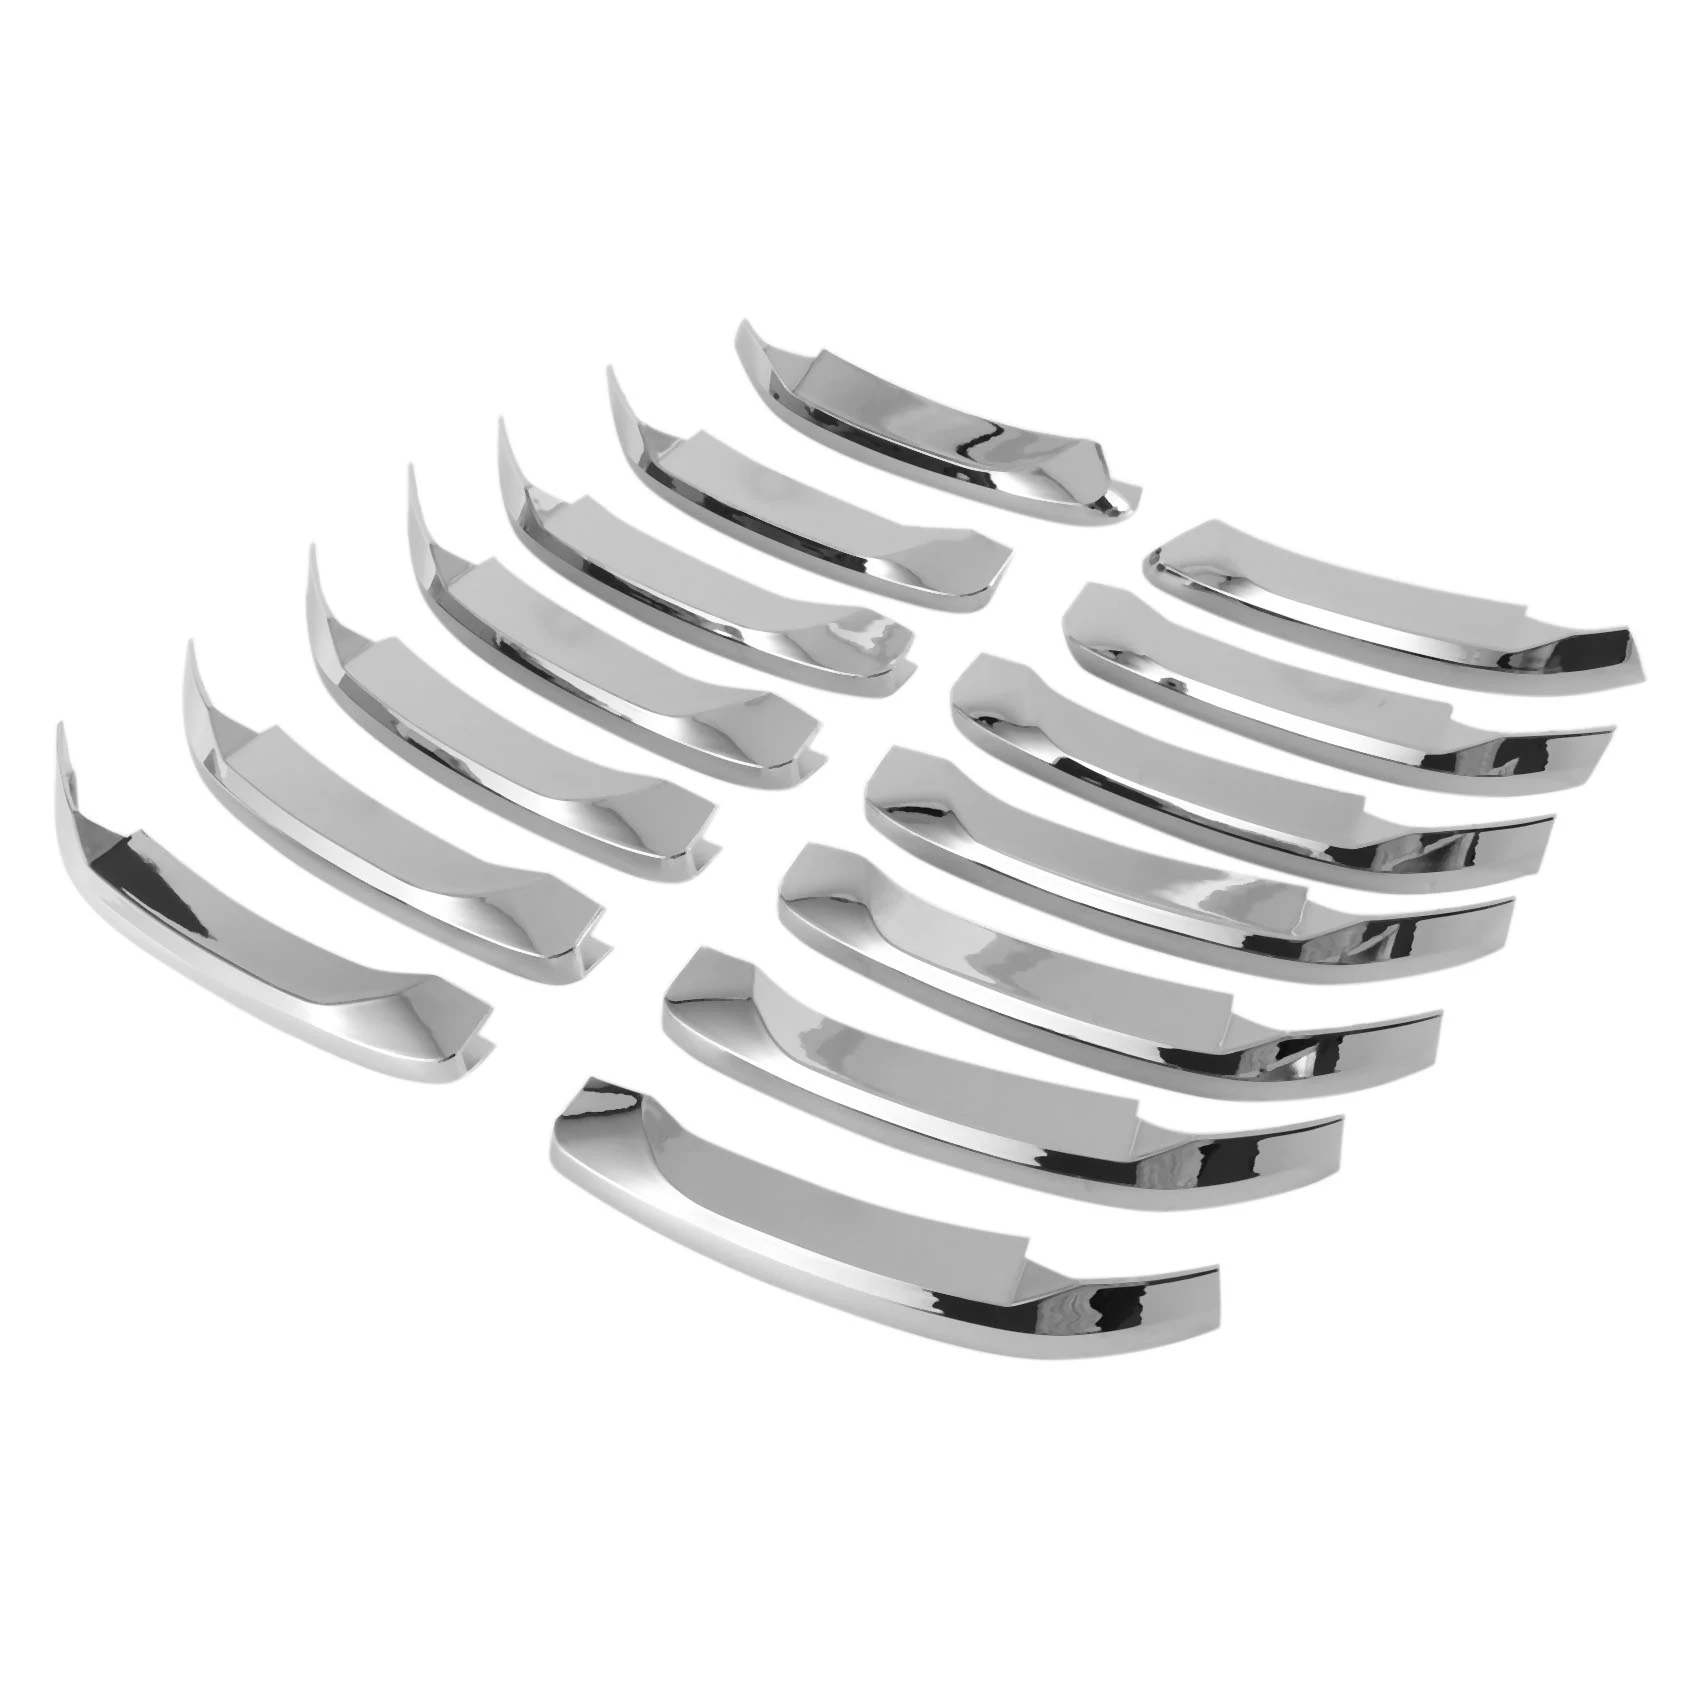 

14Pcs Car Chrome Front Grill Decoration Strips Cover Trim for-BMW X1 F48 2016-2019 Accessories